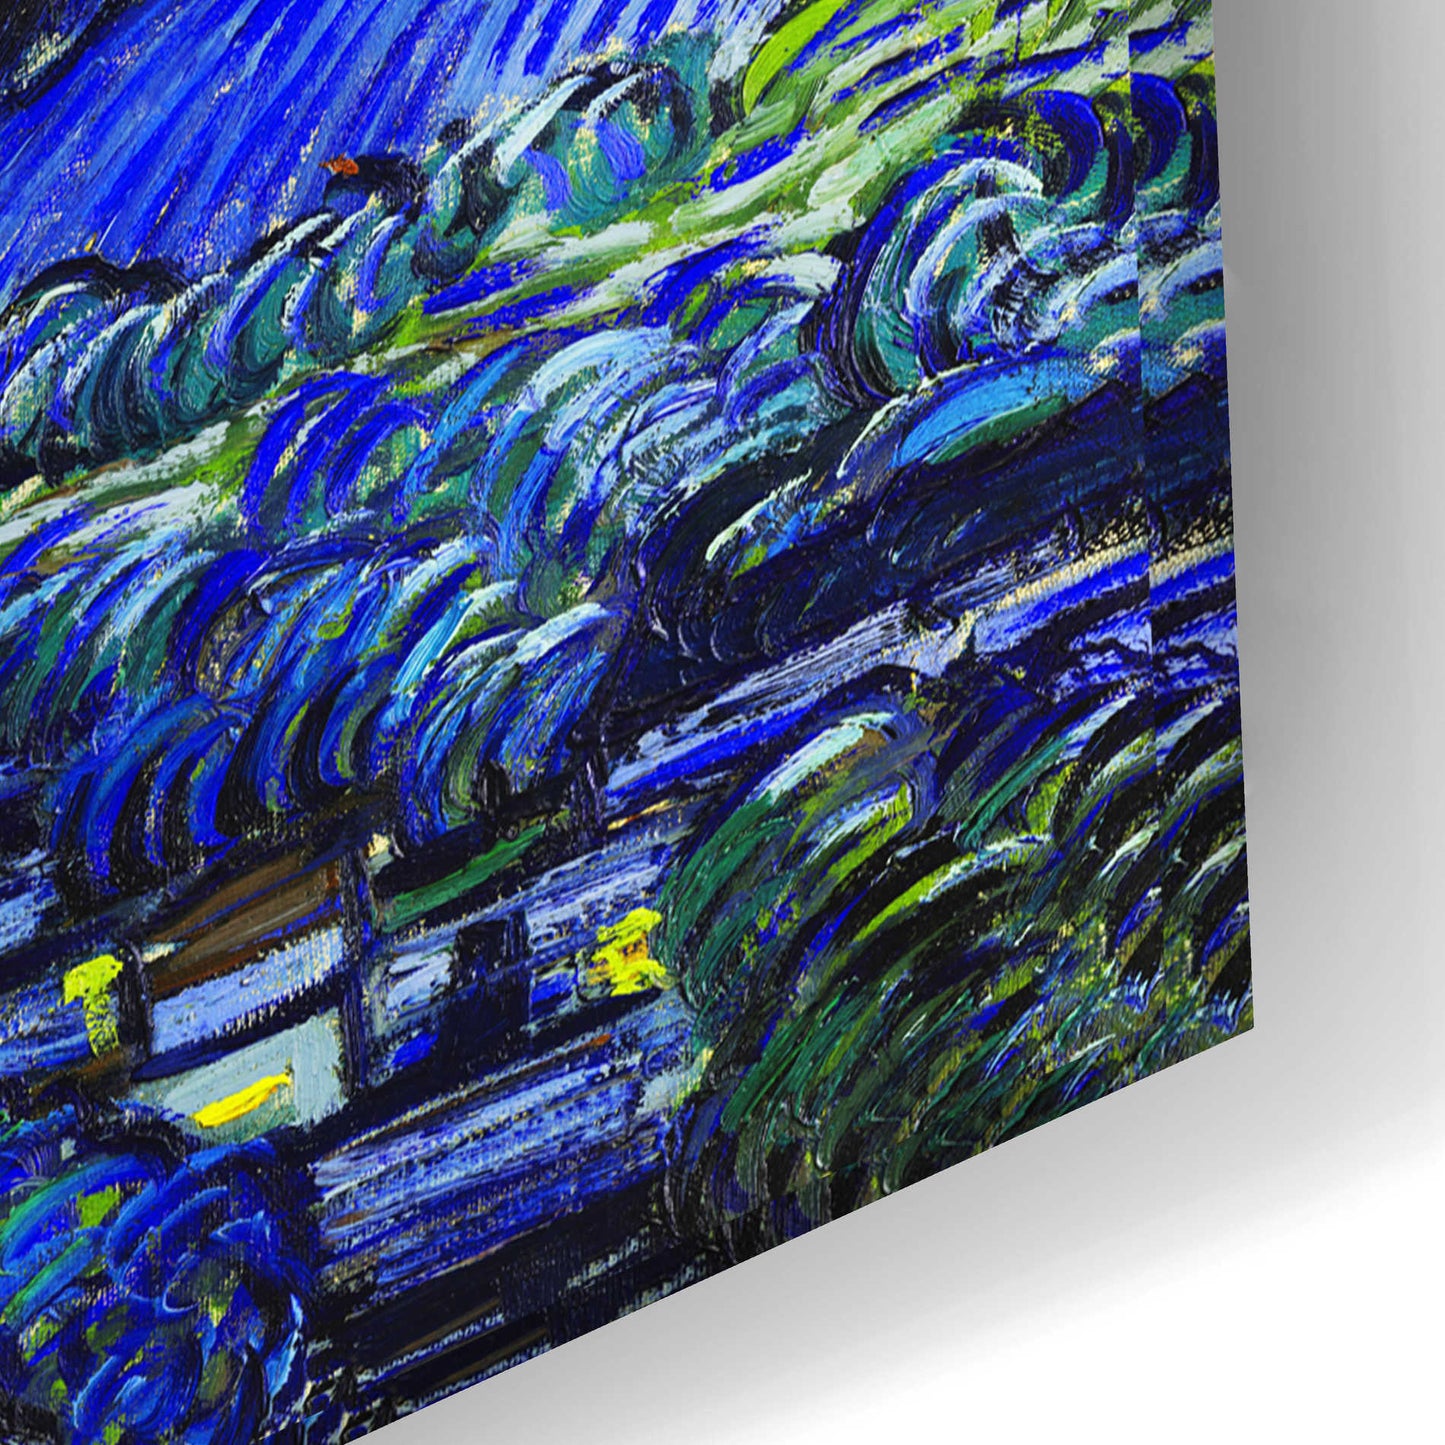 Epic Art 'The Starry Night' by Vincent van Gogh, Acrylic Glass Wall Art,24x16